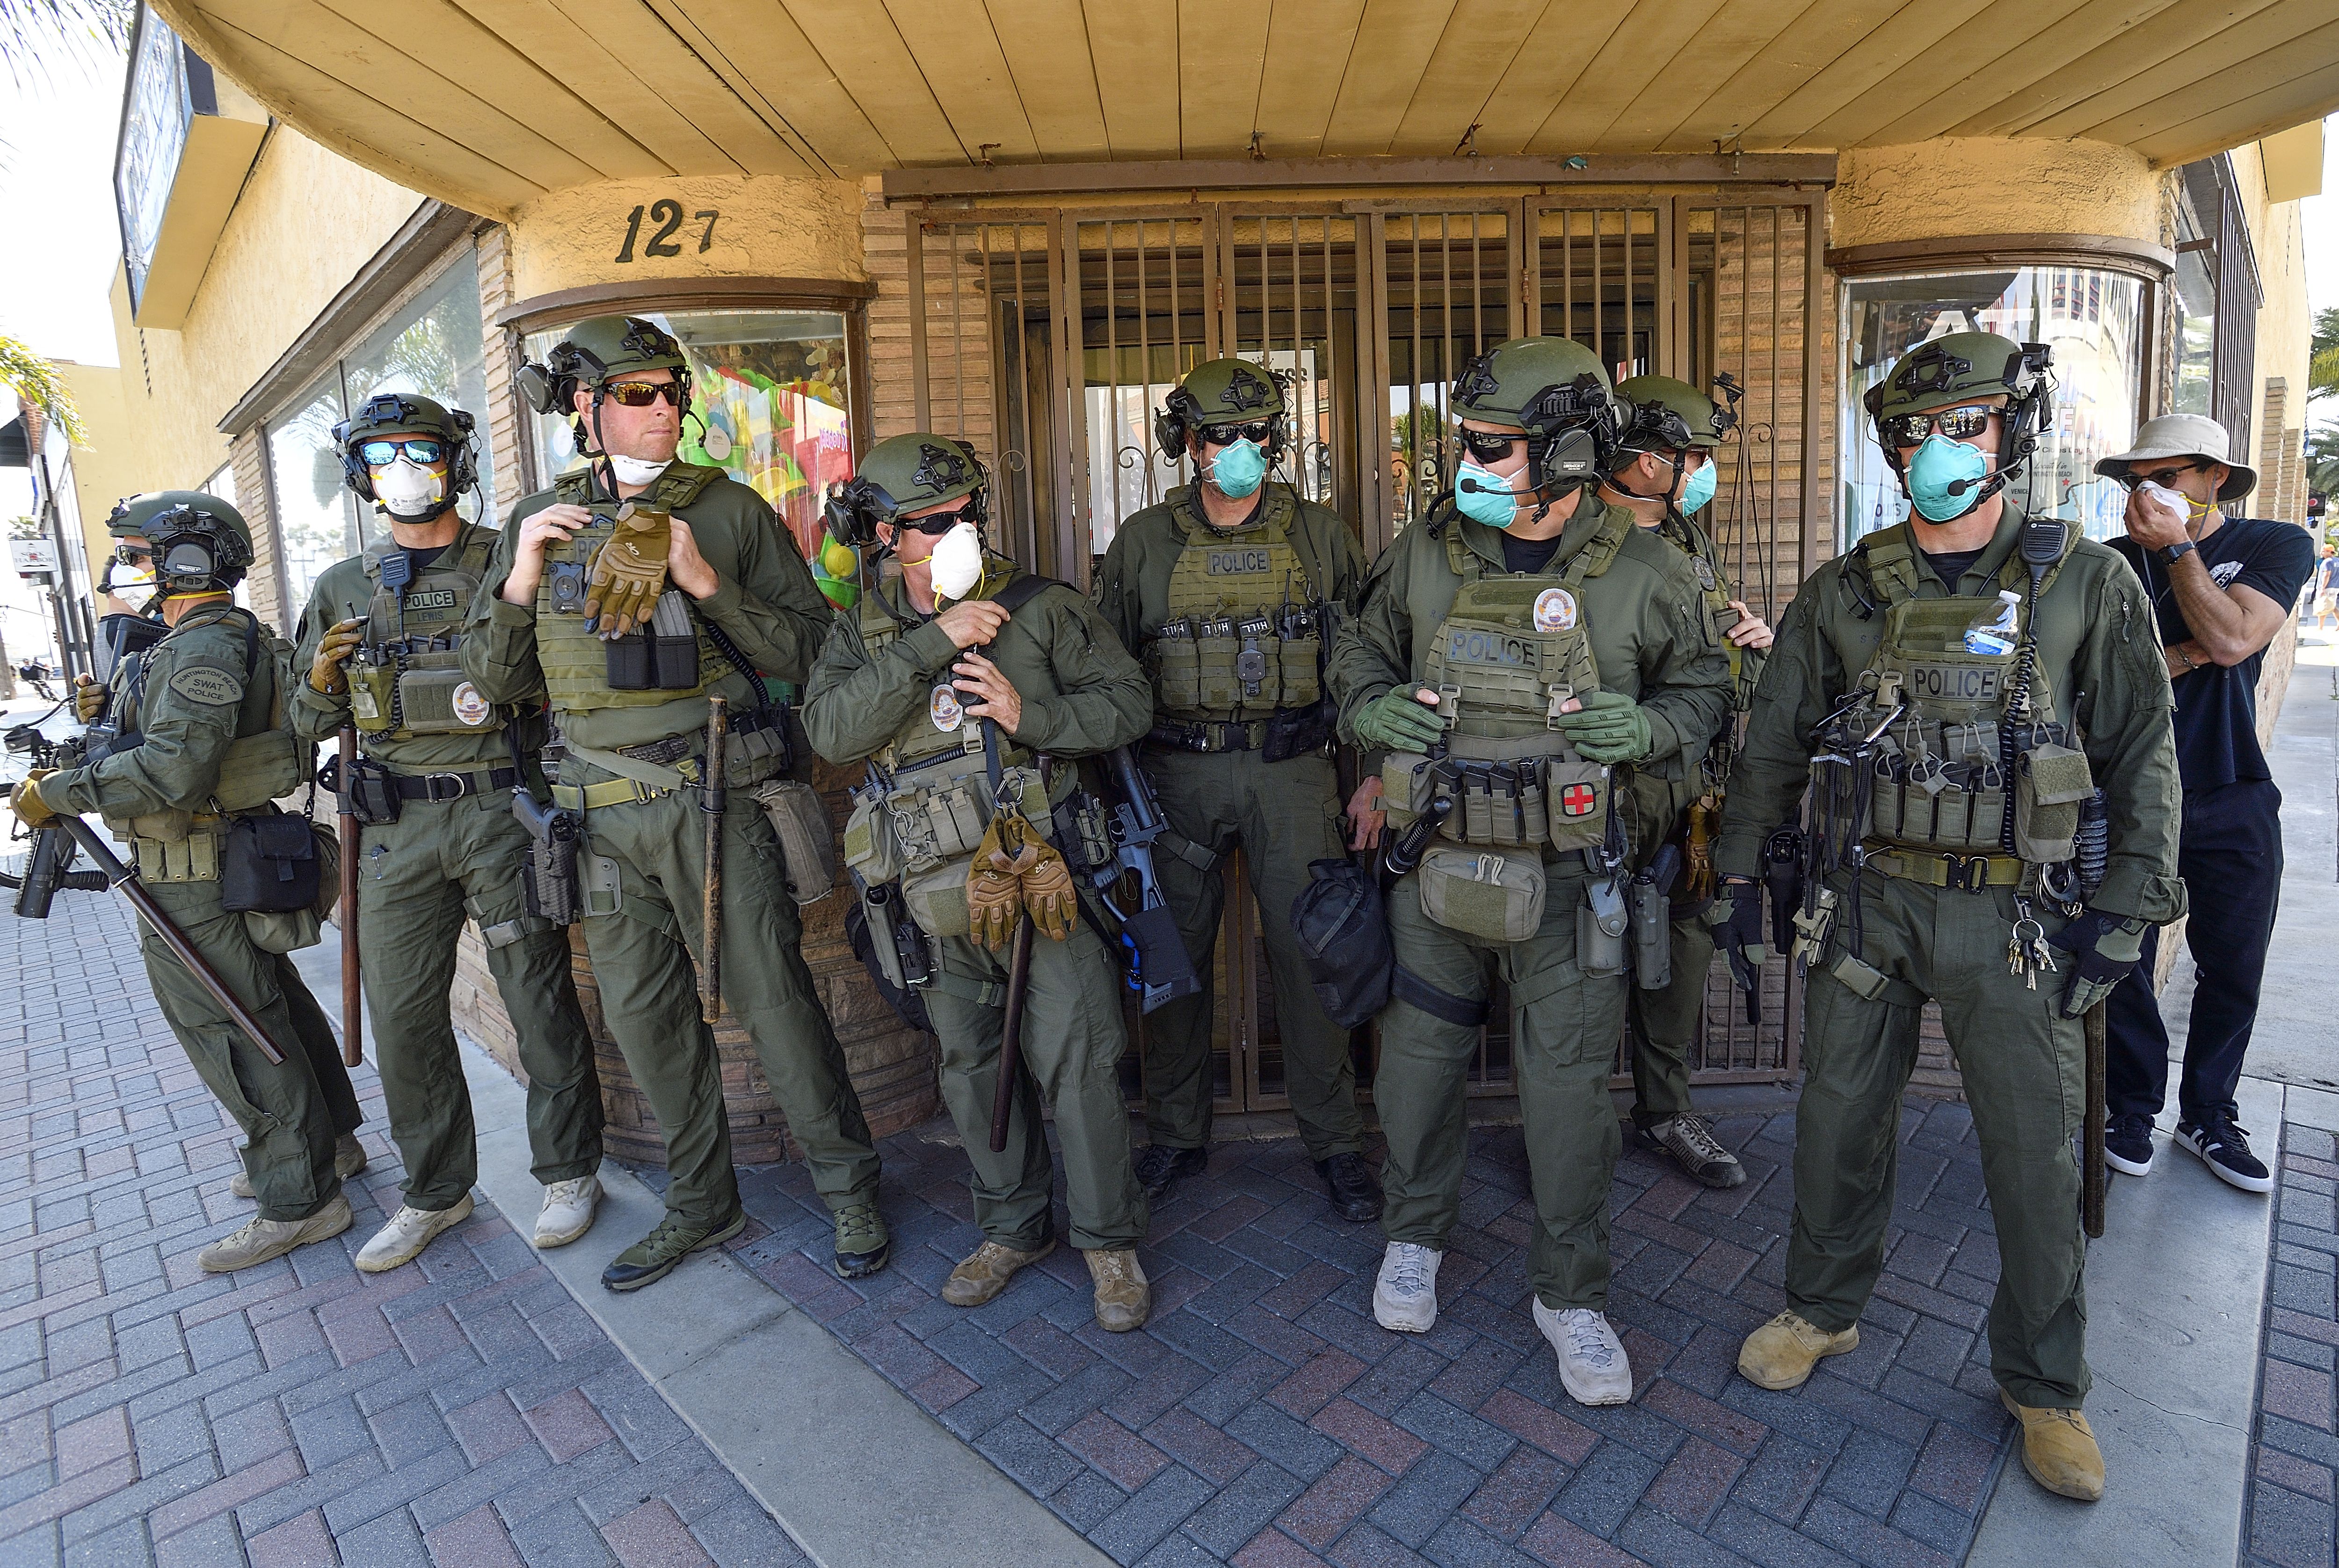 In this image, a line of police officers stand outside wearing face masks